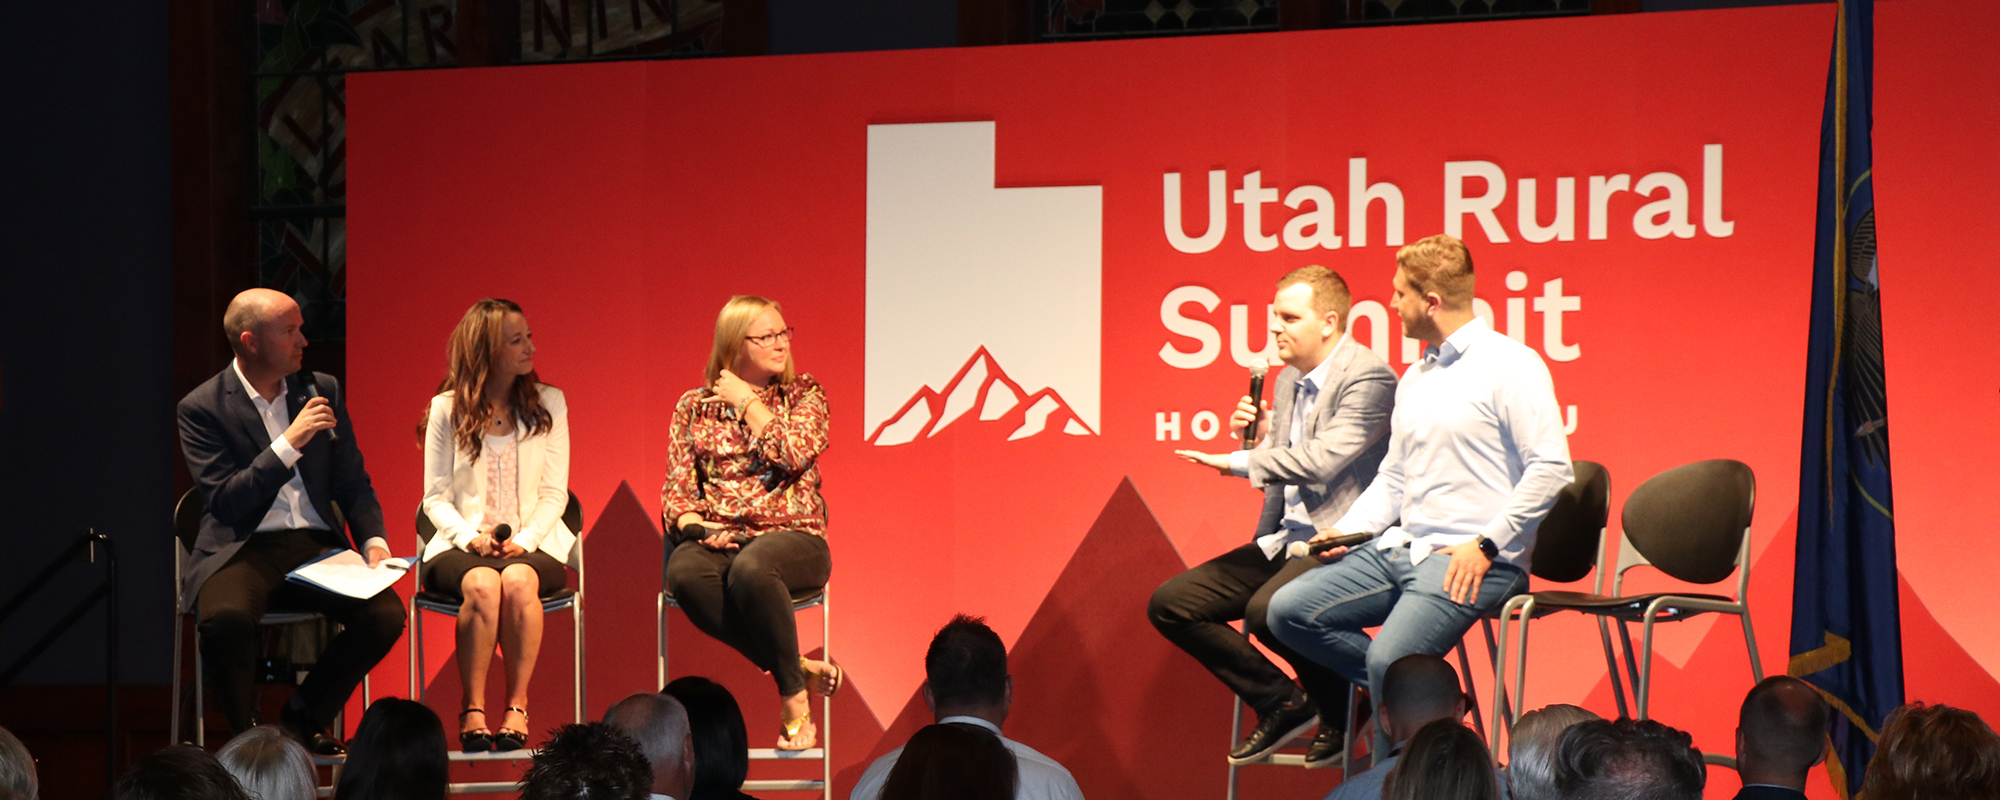 Featured image for “Annual Utah Rural Summit”